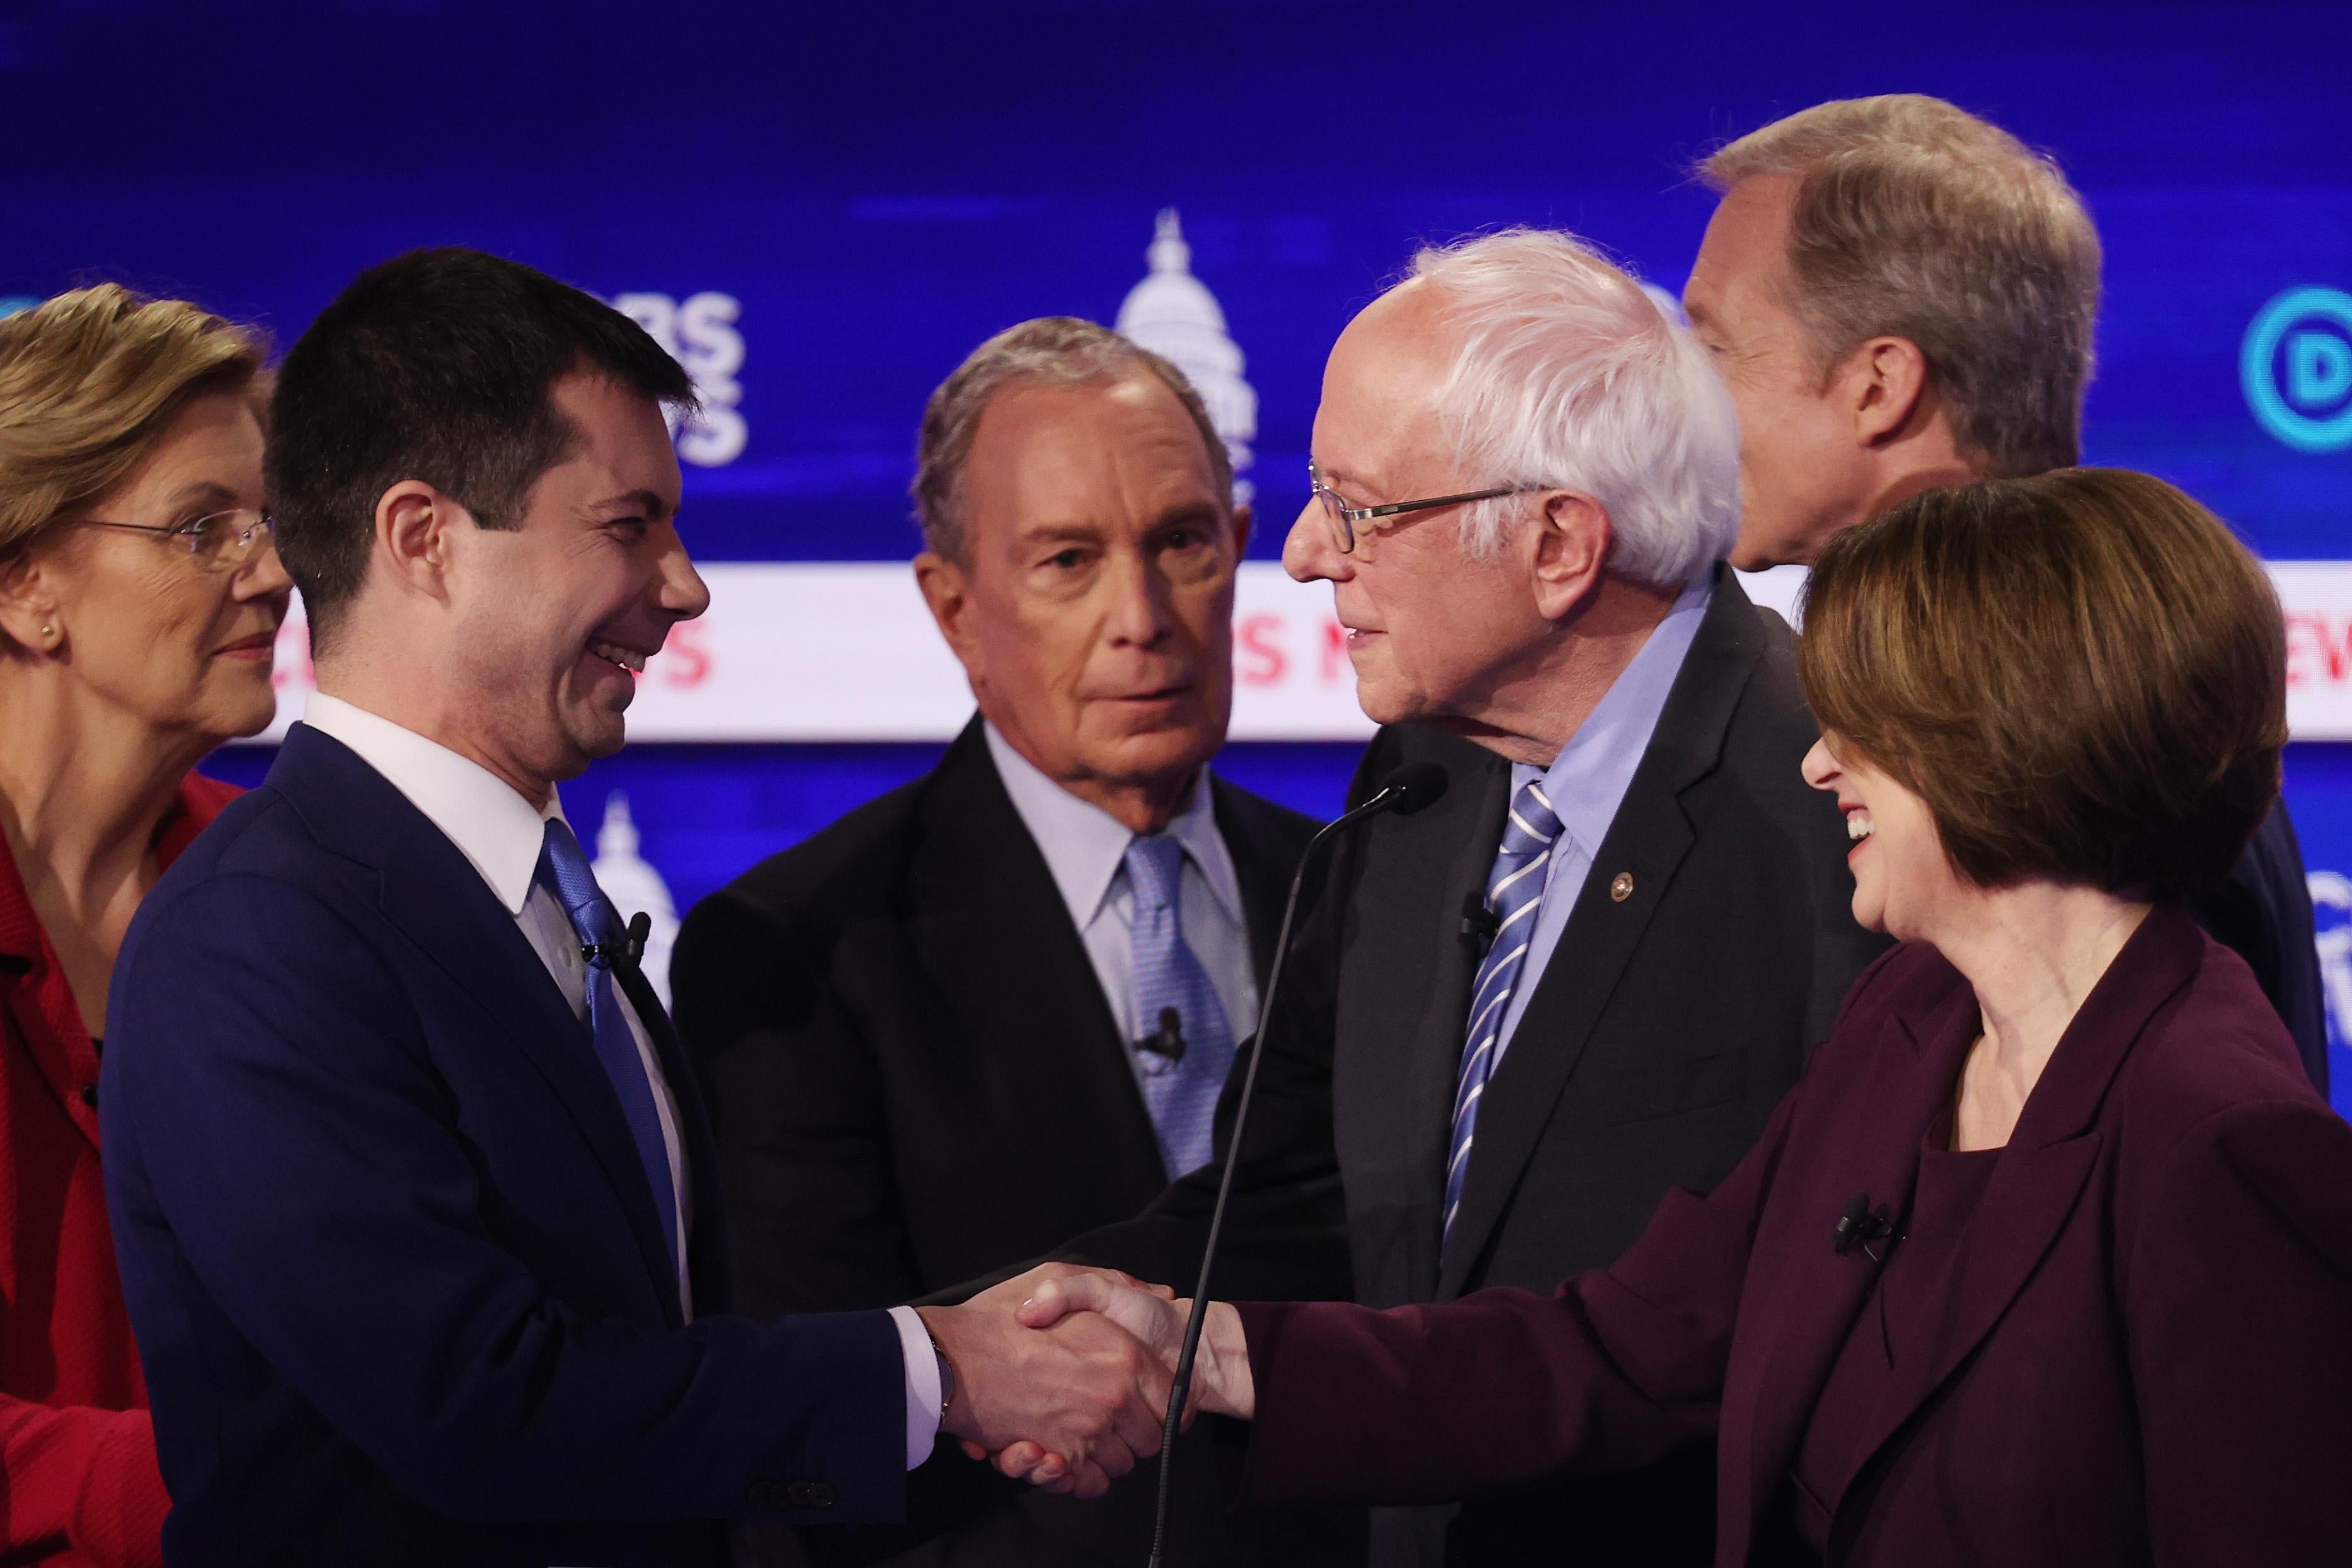 The candidates greet each other on the debate stage. Buttigieg and Klobuchar shake hands, both smiling.